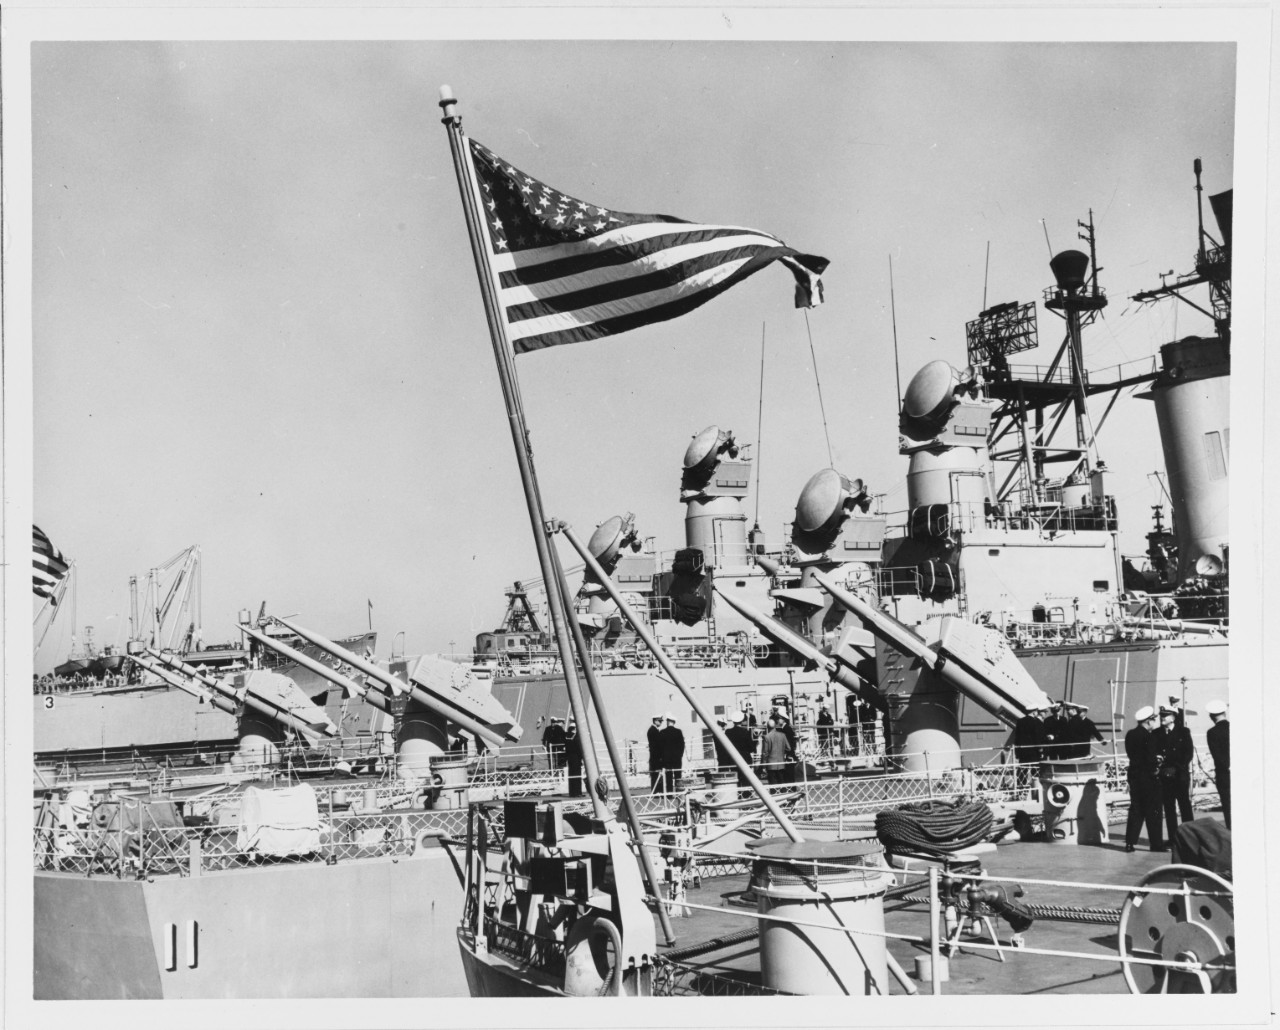 Terrier Missile aboard DLG's tied up at San Diego Harbor, California.  American flag. Left to Right: USS COONTZ (DLG-9), USS KING (DLG-10), USS MAHAN (DLG-11), and USS PREBLE (DLG-15).  5/19/1961